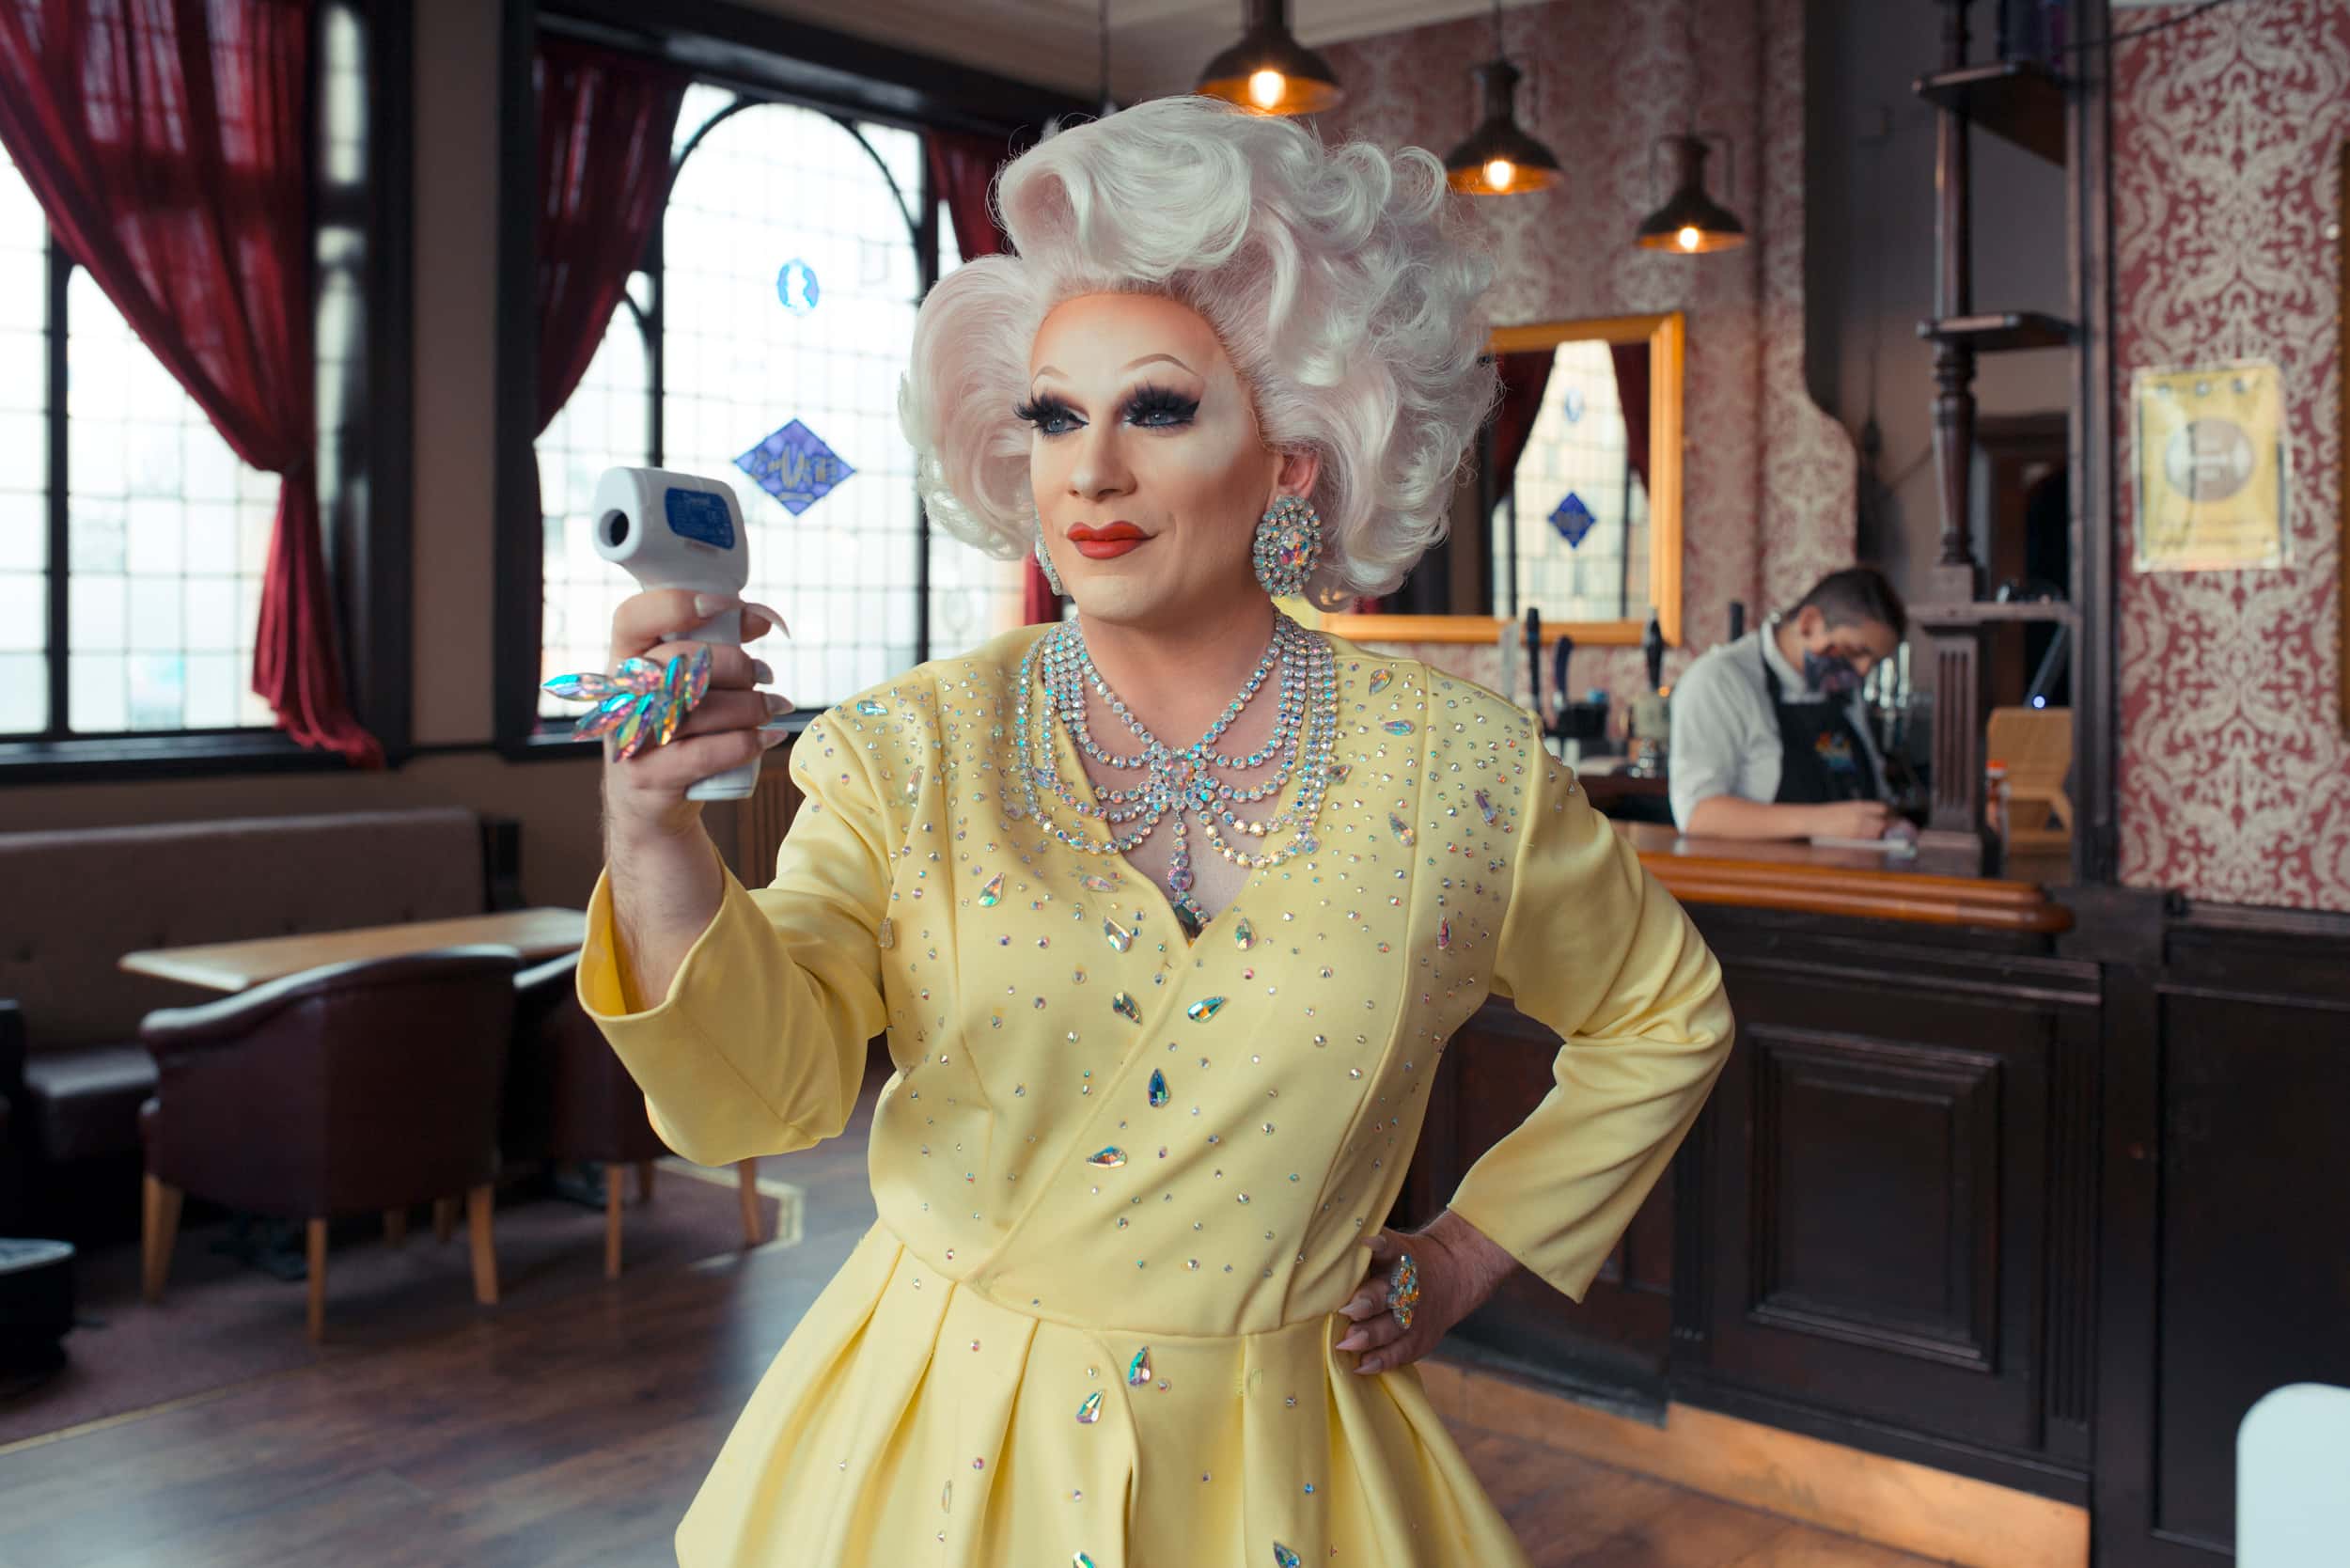 A portrait of mary gold at LGBT venue, golden cross photographed for omnigov in association with guardian labs.